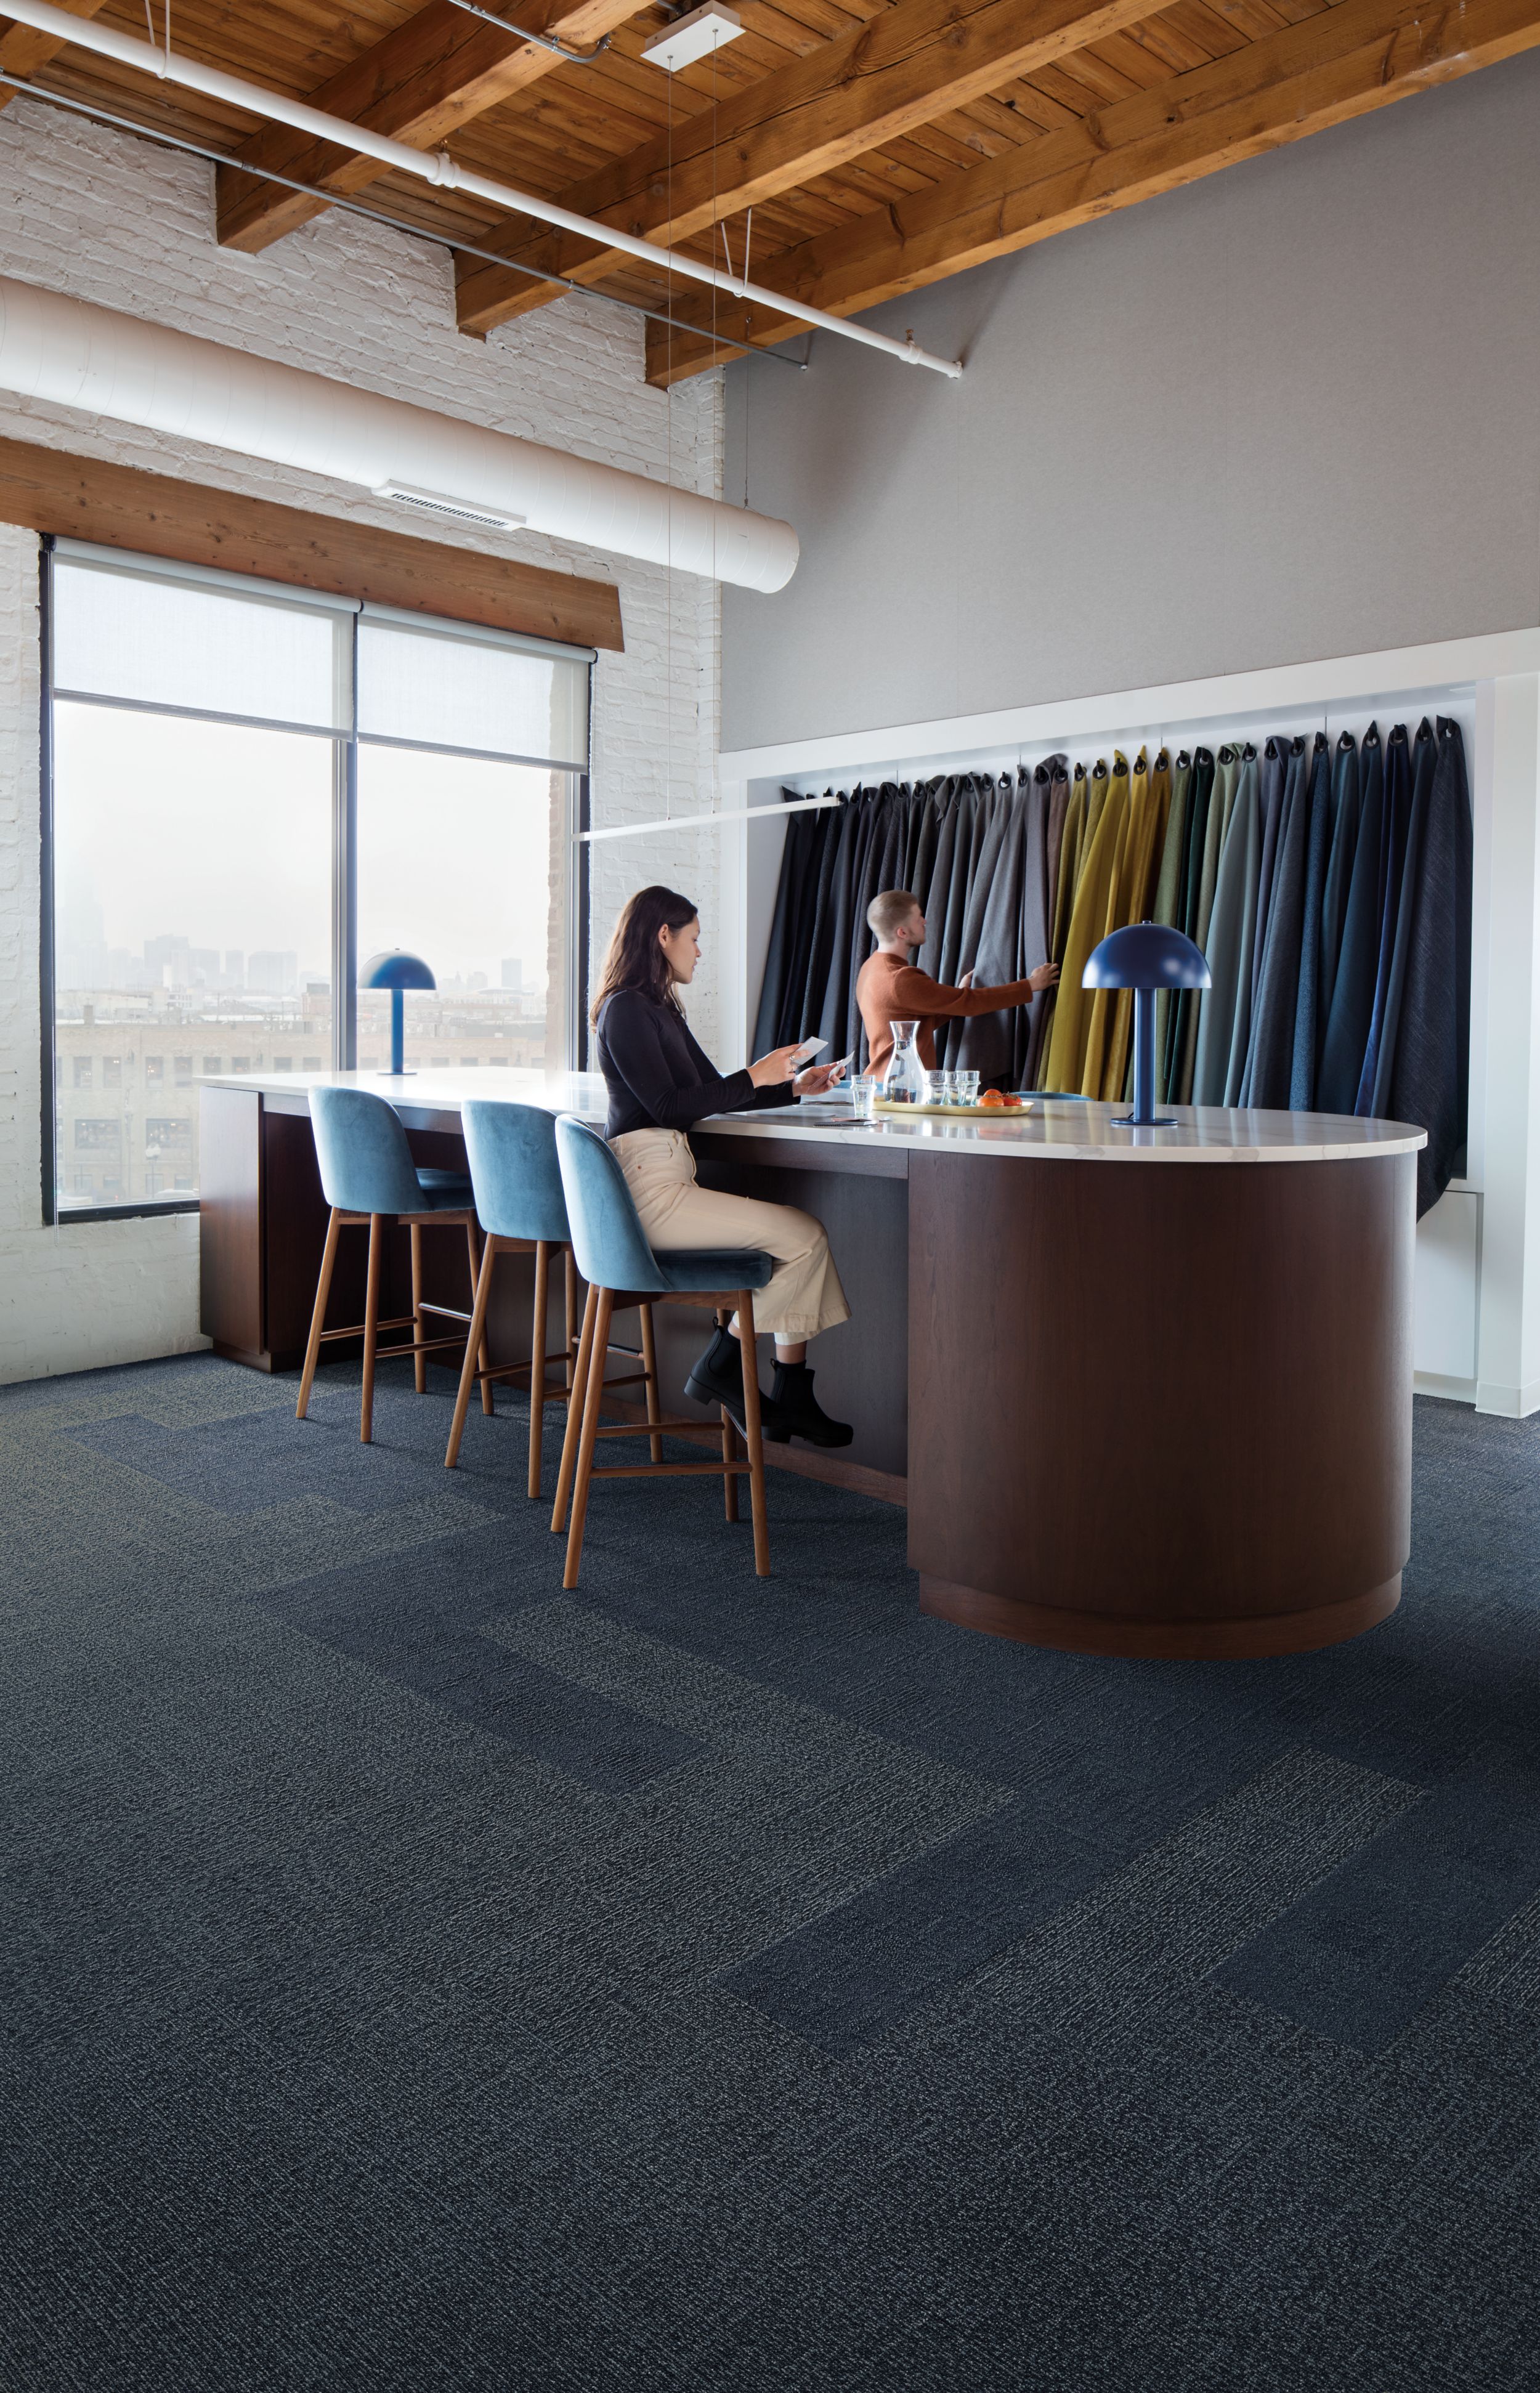 image Interface Shishu Stitch and Vintage Kimono plank carpet tile in workspace with bar height table and person sitting numéro 6